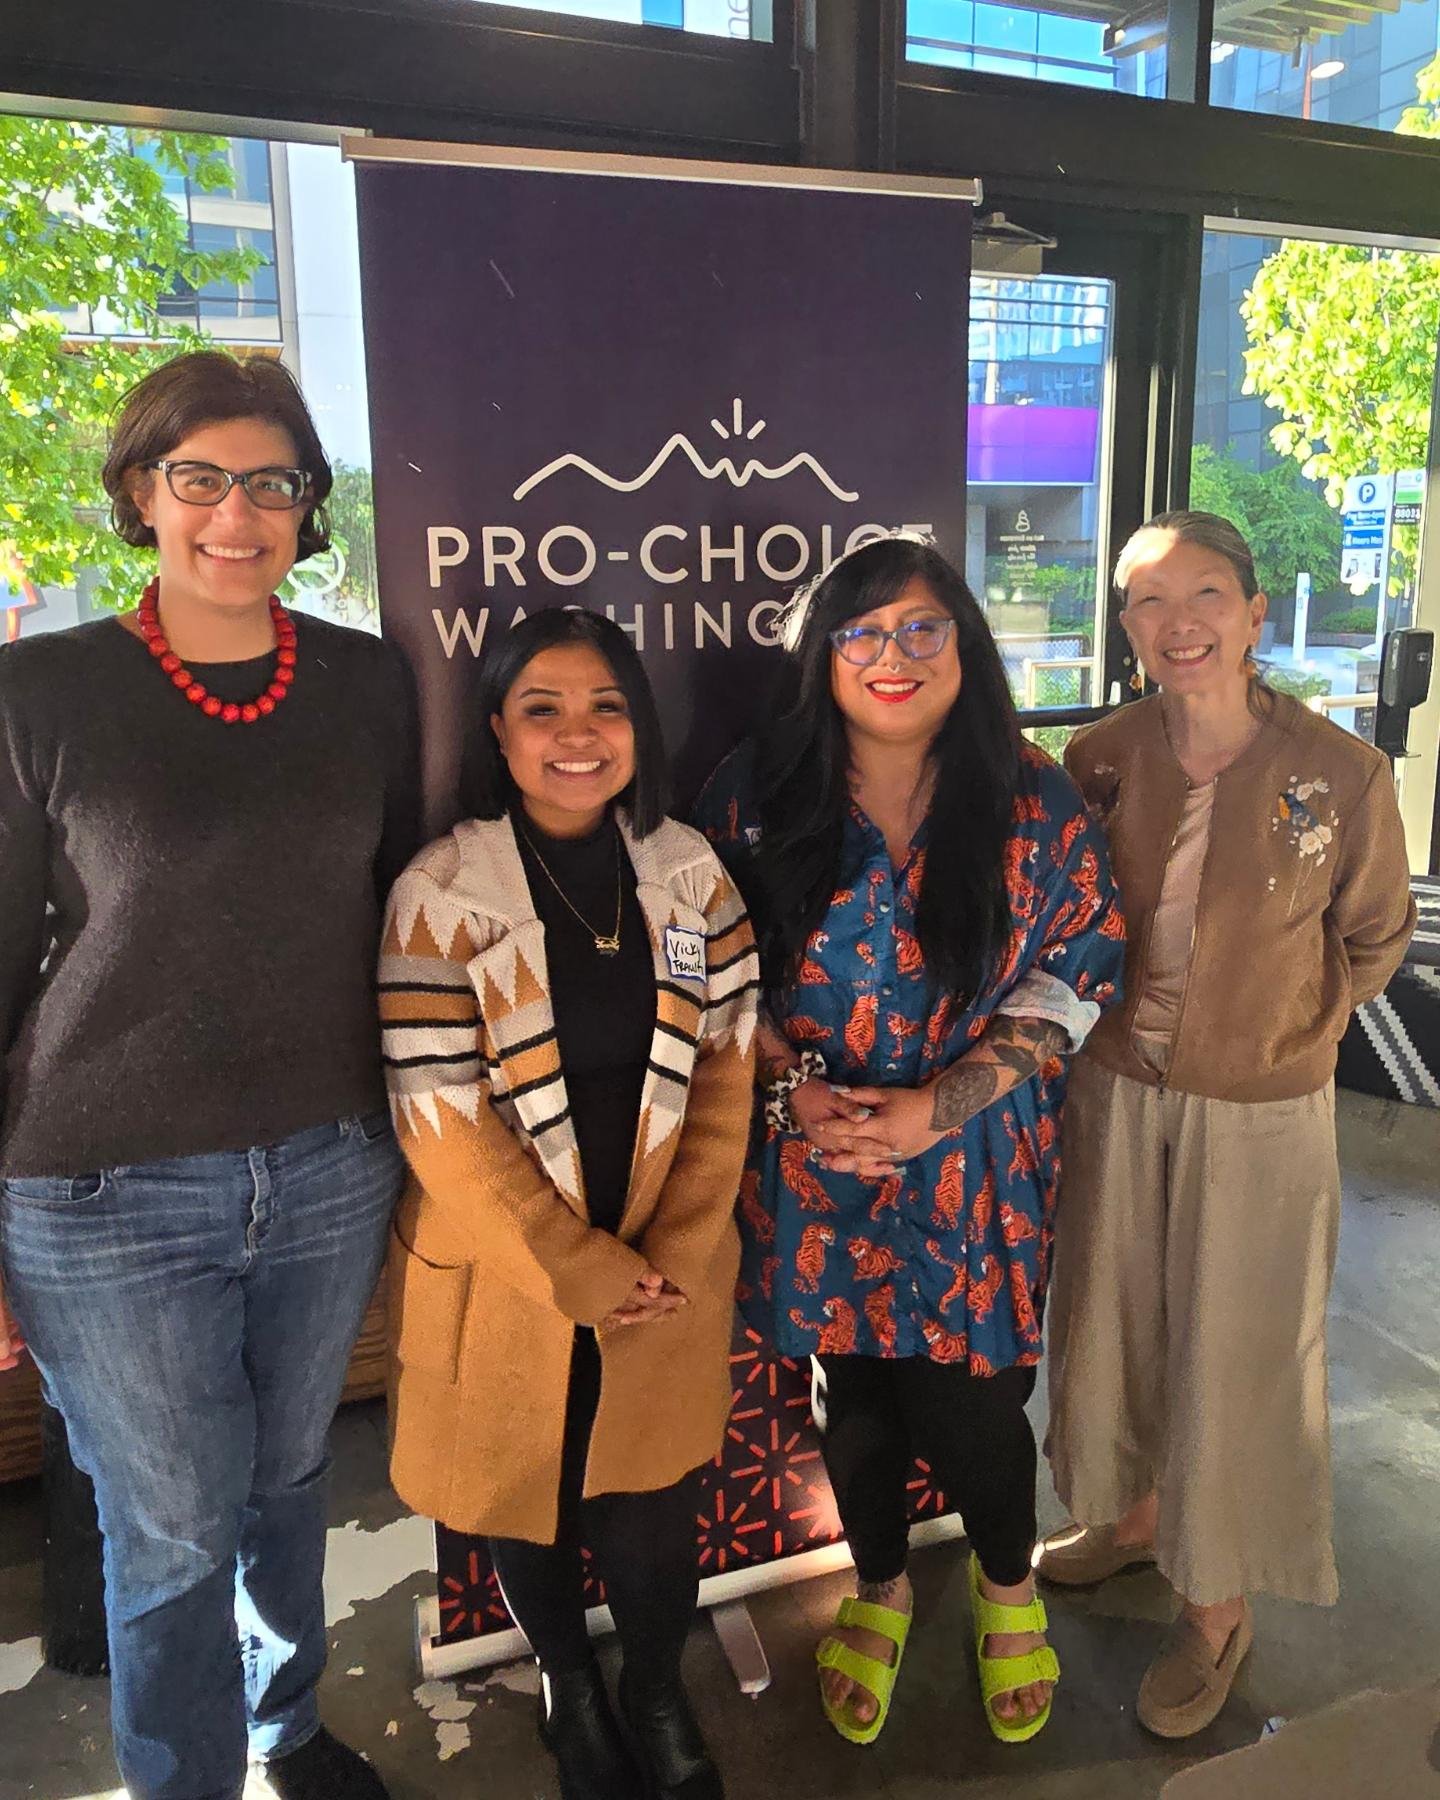 Had the privilege of meeting State Representative Nicole Macri and re-connecting with State Representative Sharon Tomiko Santos at Pro-Choice Washington's Conversations for Change! Fun fact, I used to be a comms staffer for Rep. Tomiko Santos when I 